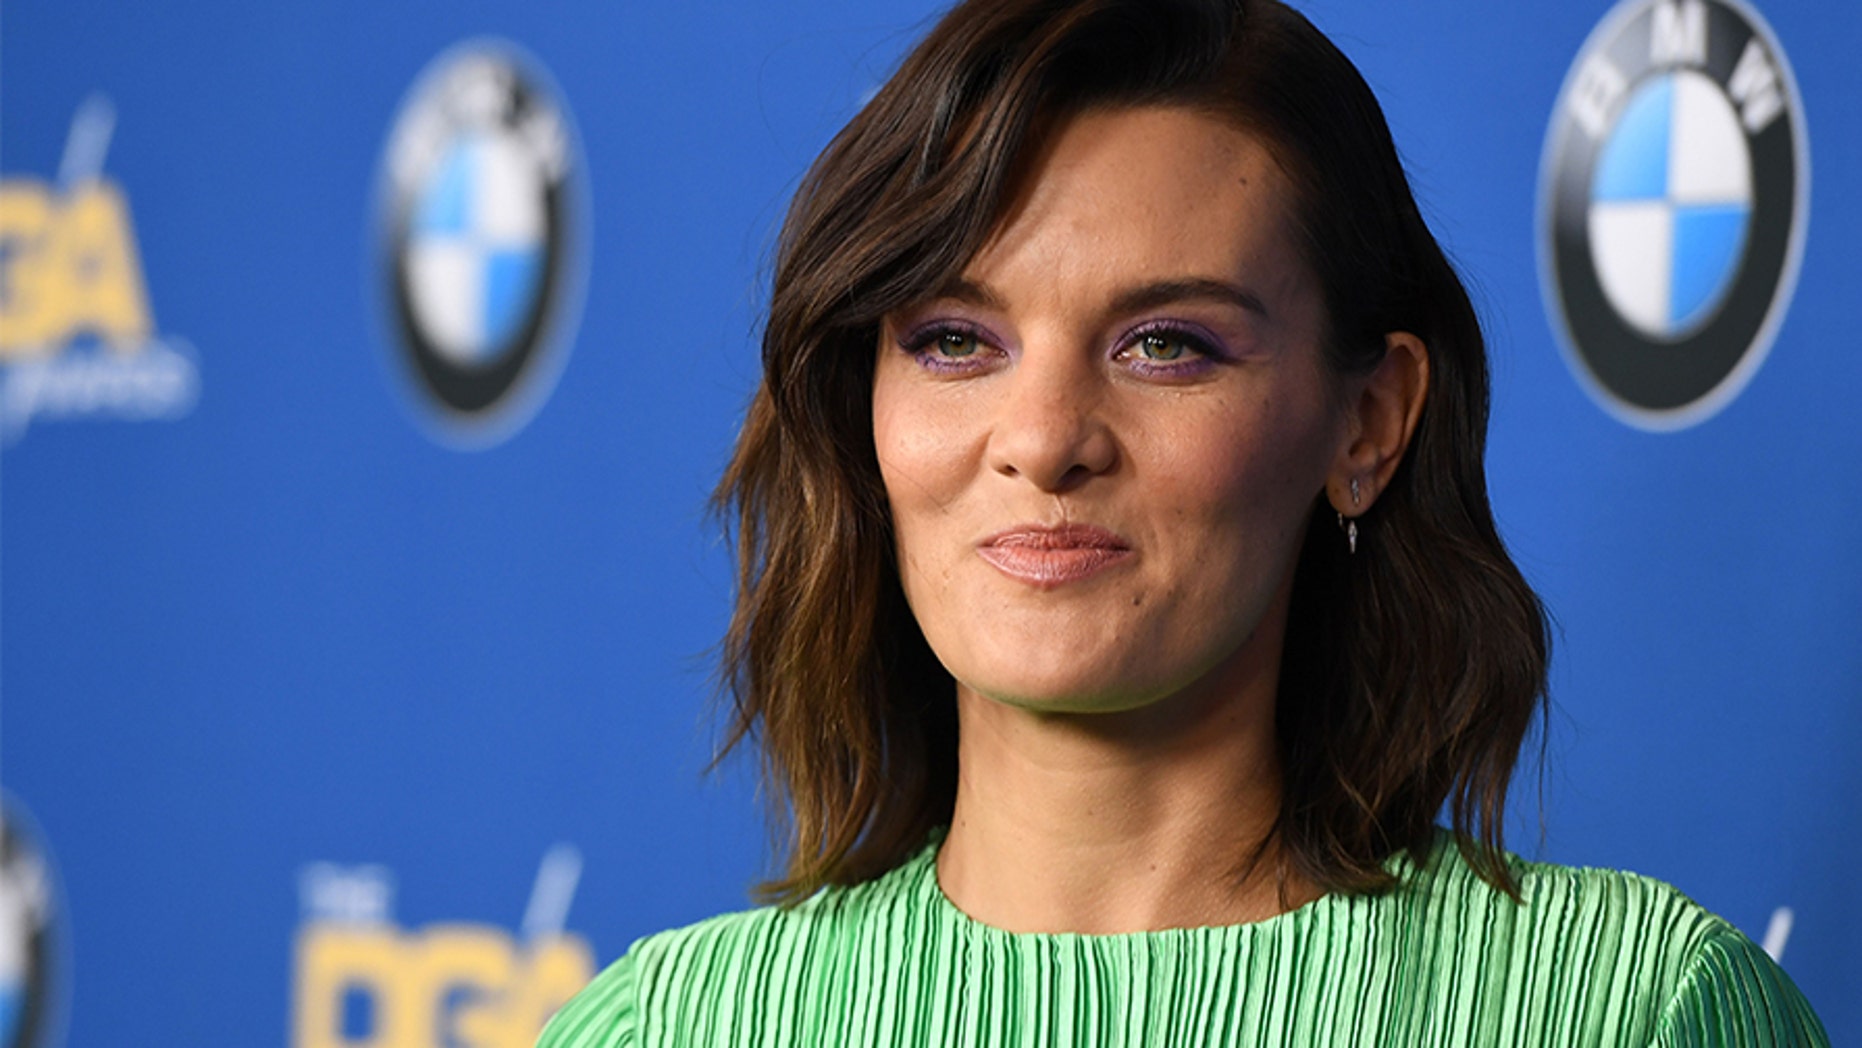 ‘SMILF’ creator Frankie Shaw opens up on misconduct allegations